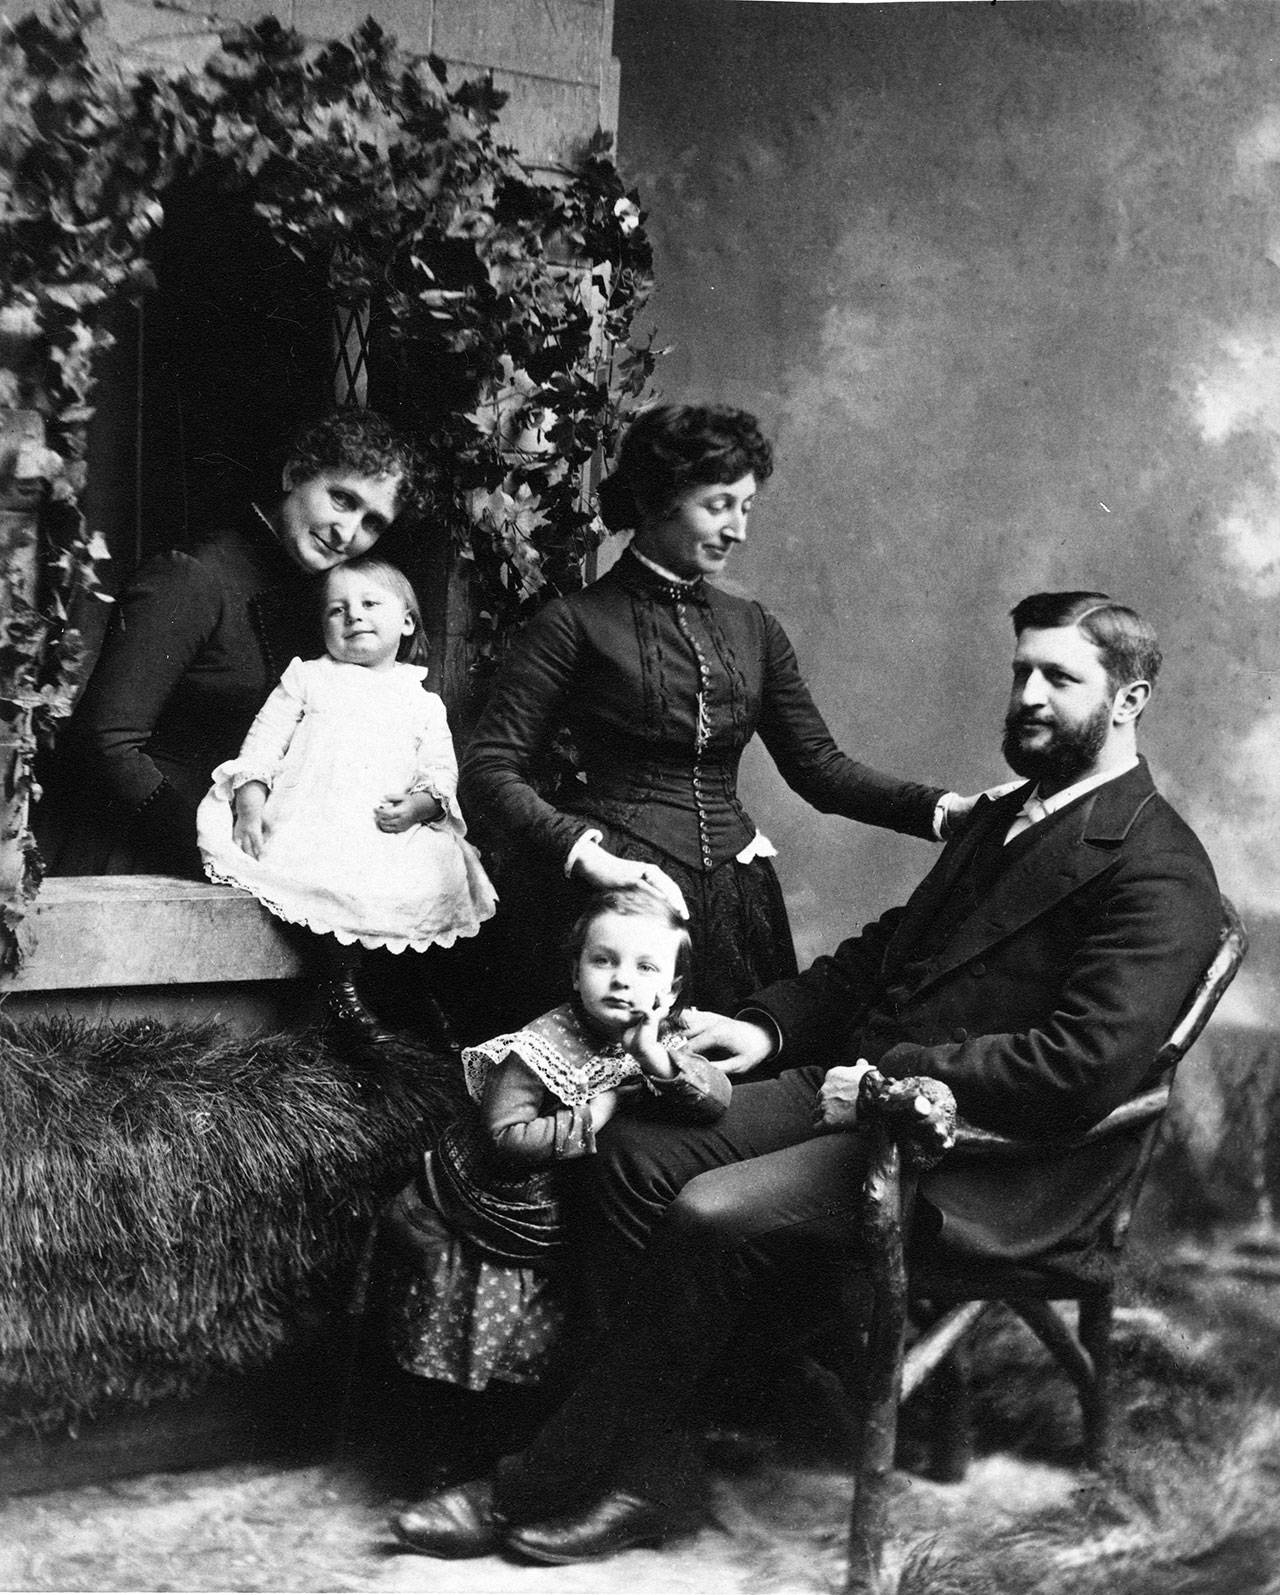 The Beecher family’s portrait, taken in 1885. In the back, from left, are Mary Hadley Fletcher holding Mary Eunice Beecher and Harriet Foster Beecher. In the front, from left, are Henry Ward Beecher II and Capt. Herbert Foote Beecher. (Jefferson County Historical Society)